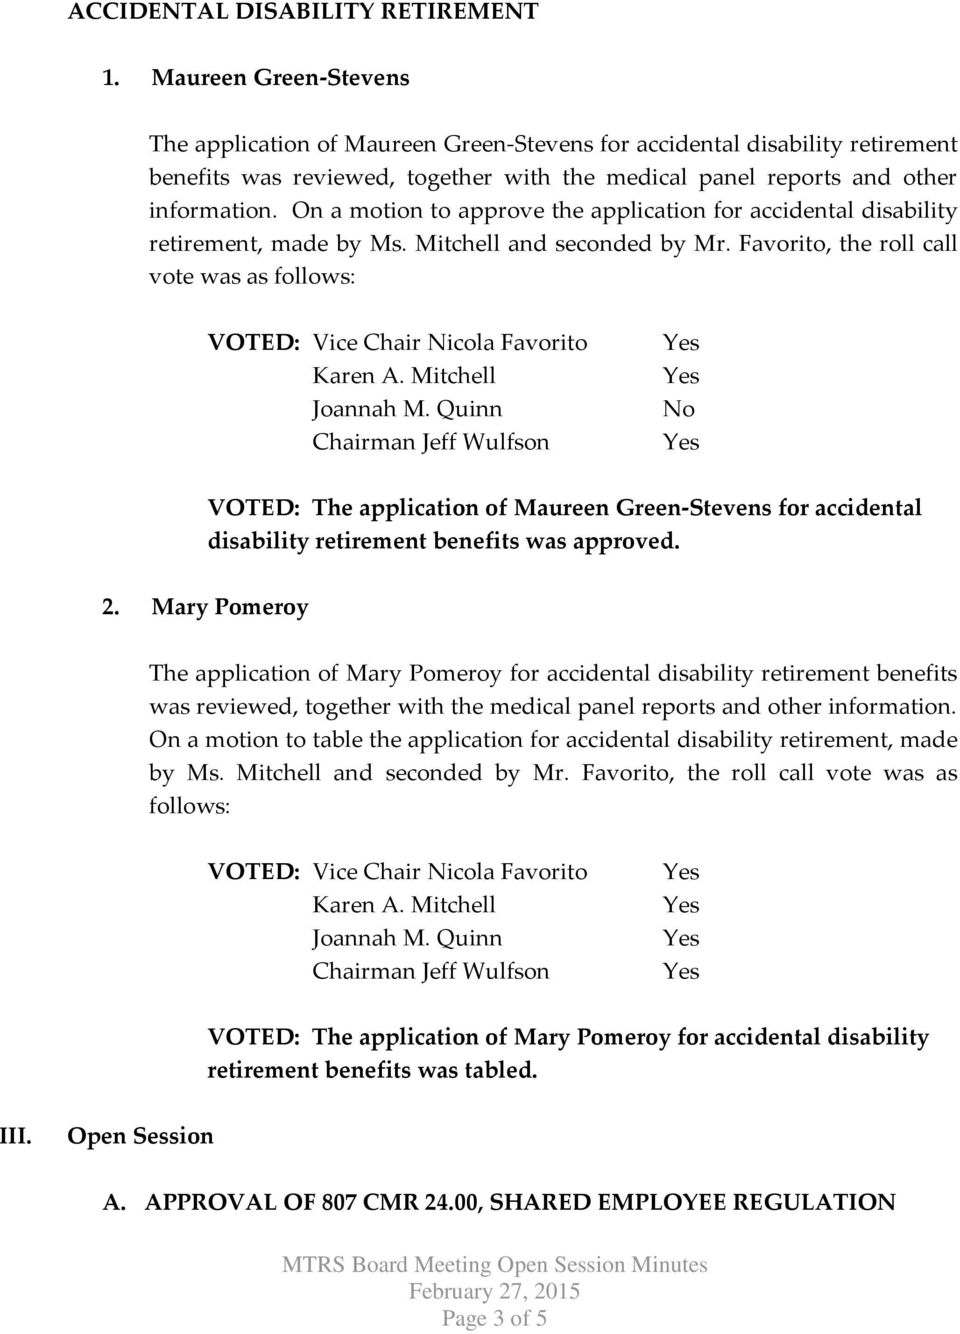 On a motion to approve the application for accidental disability retirement, made by Ms. Mitchell and seconded by Mr.